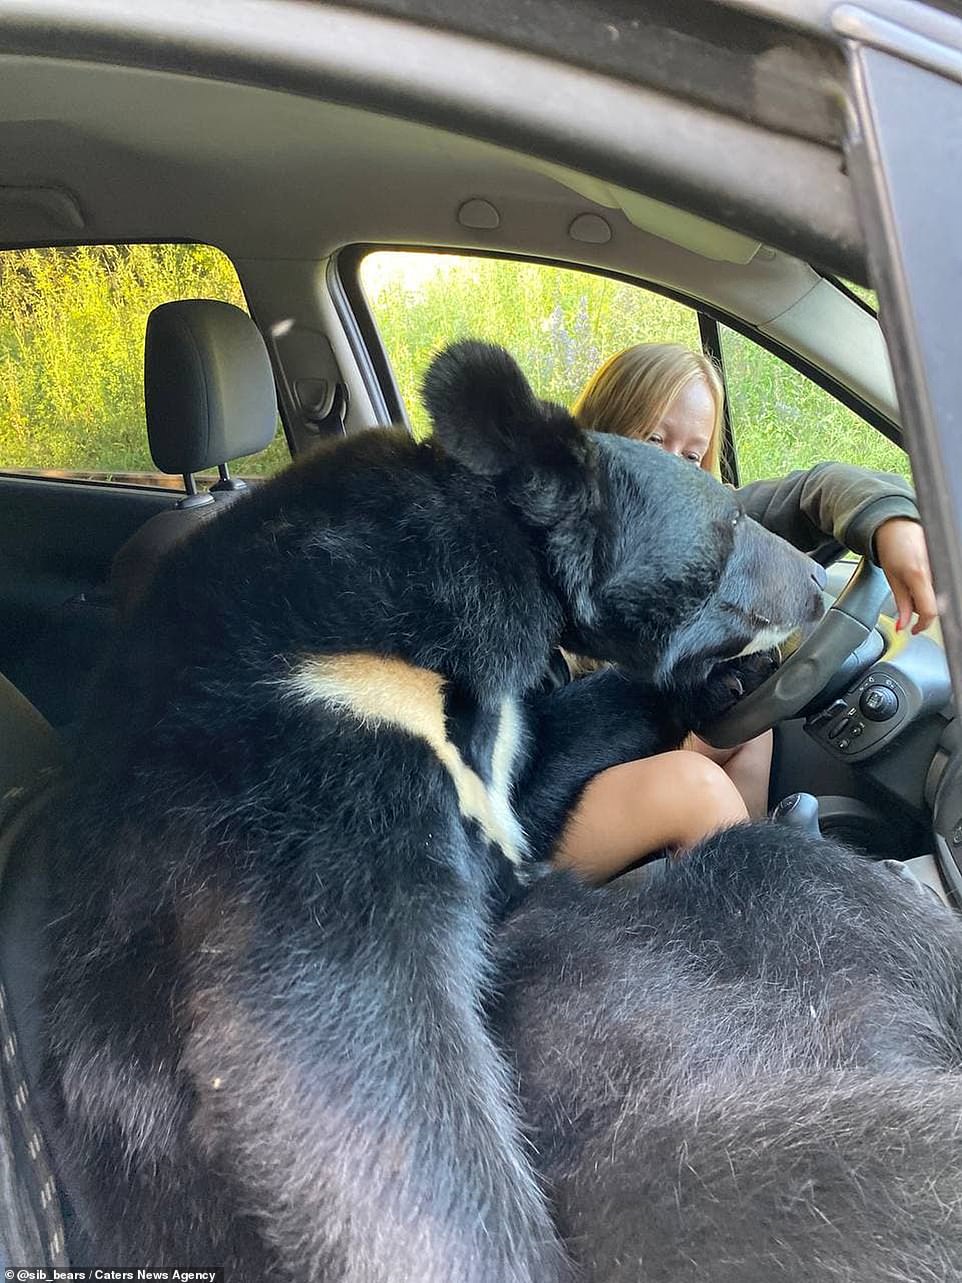 'He is an inquisitive bear and the main thing he was interested in was the steering wheel,' Dichka said of her travel buddy